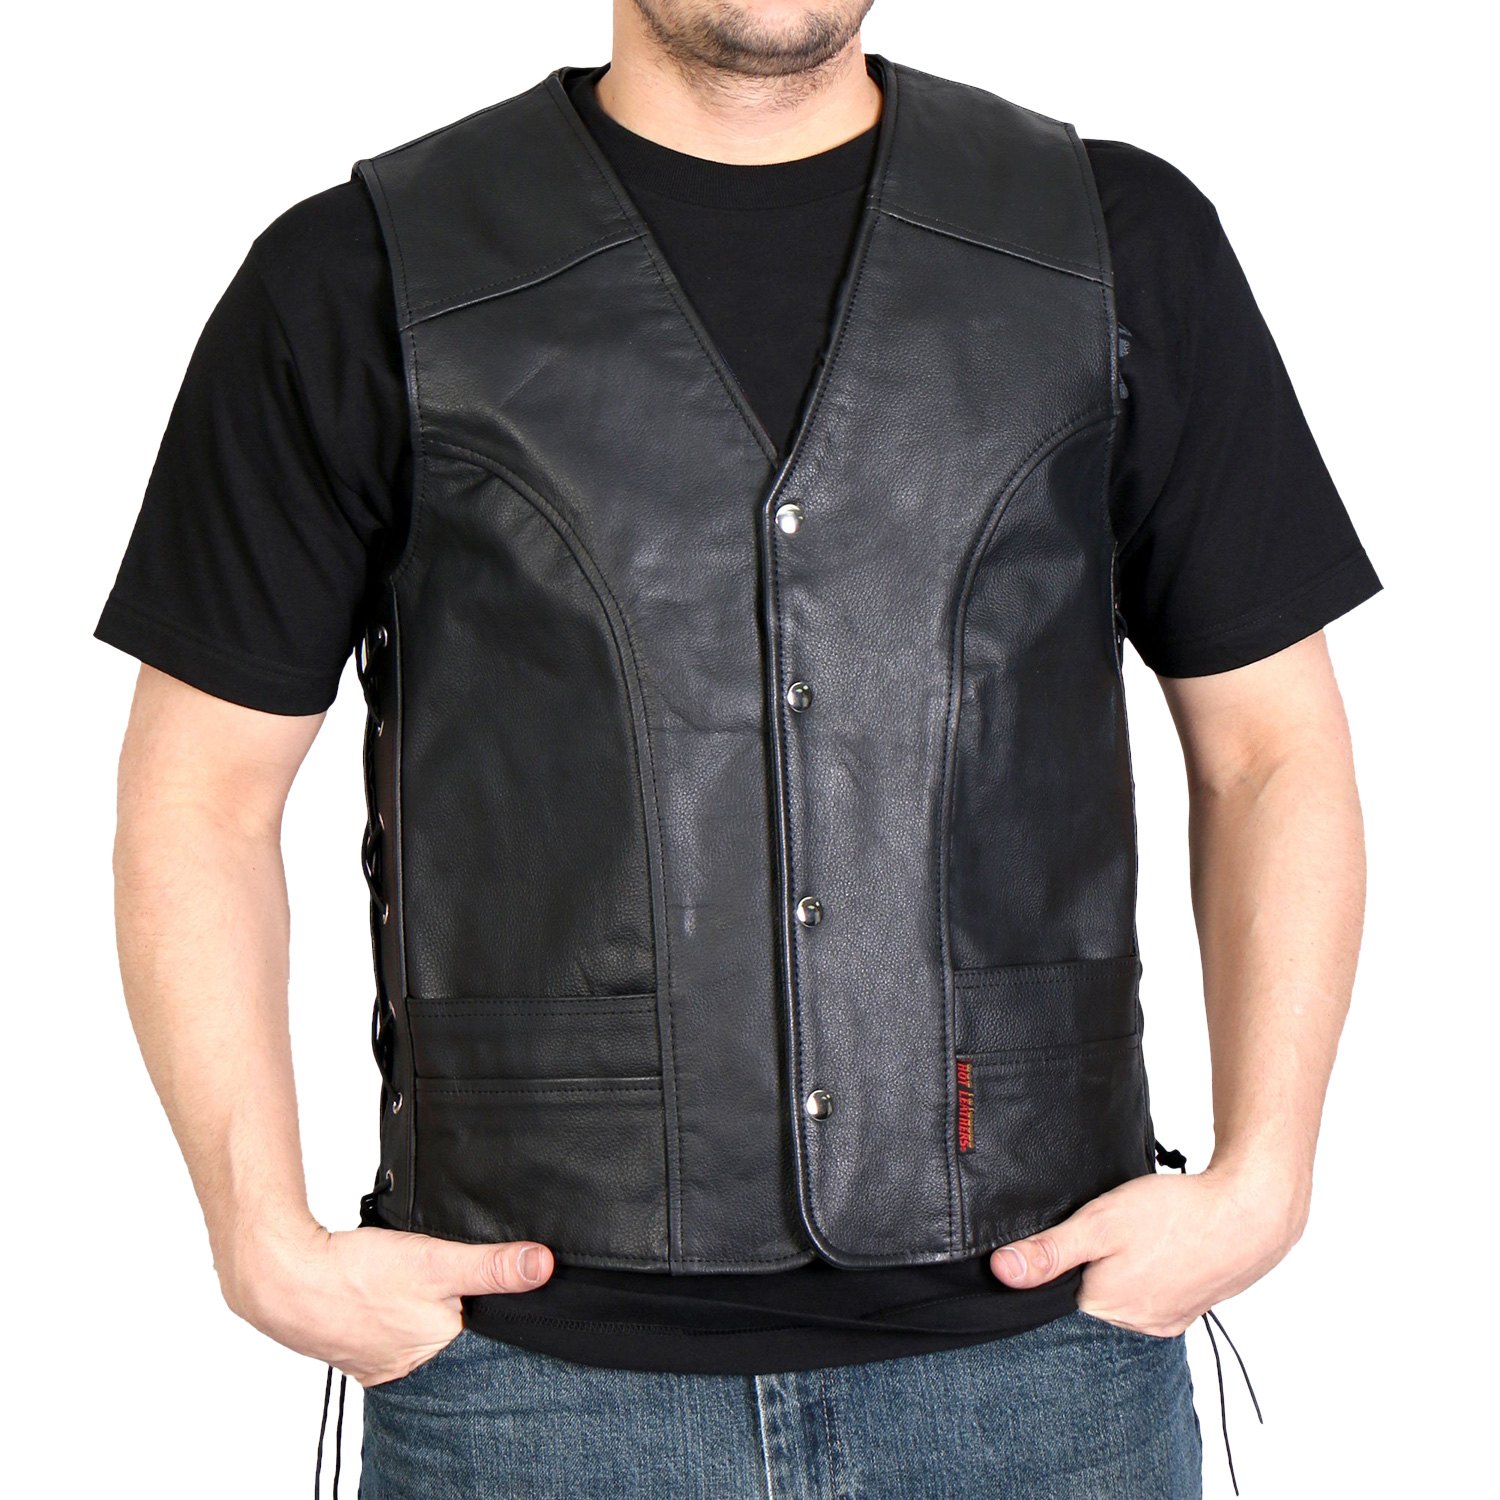 Mens Motorcycle Waistcoat Biker black Vest jacket with side laces sizes from 3xs 